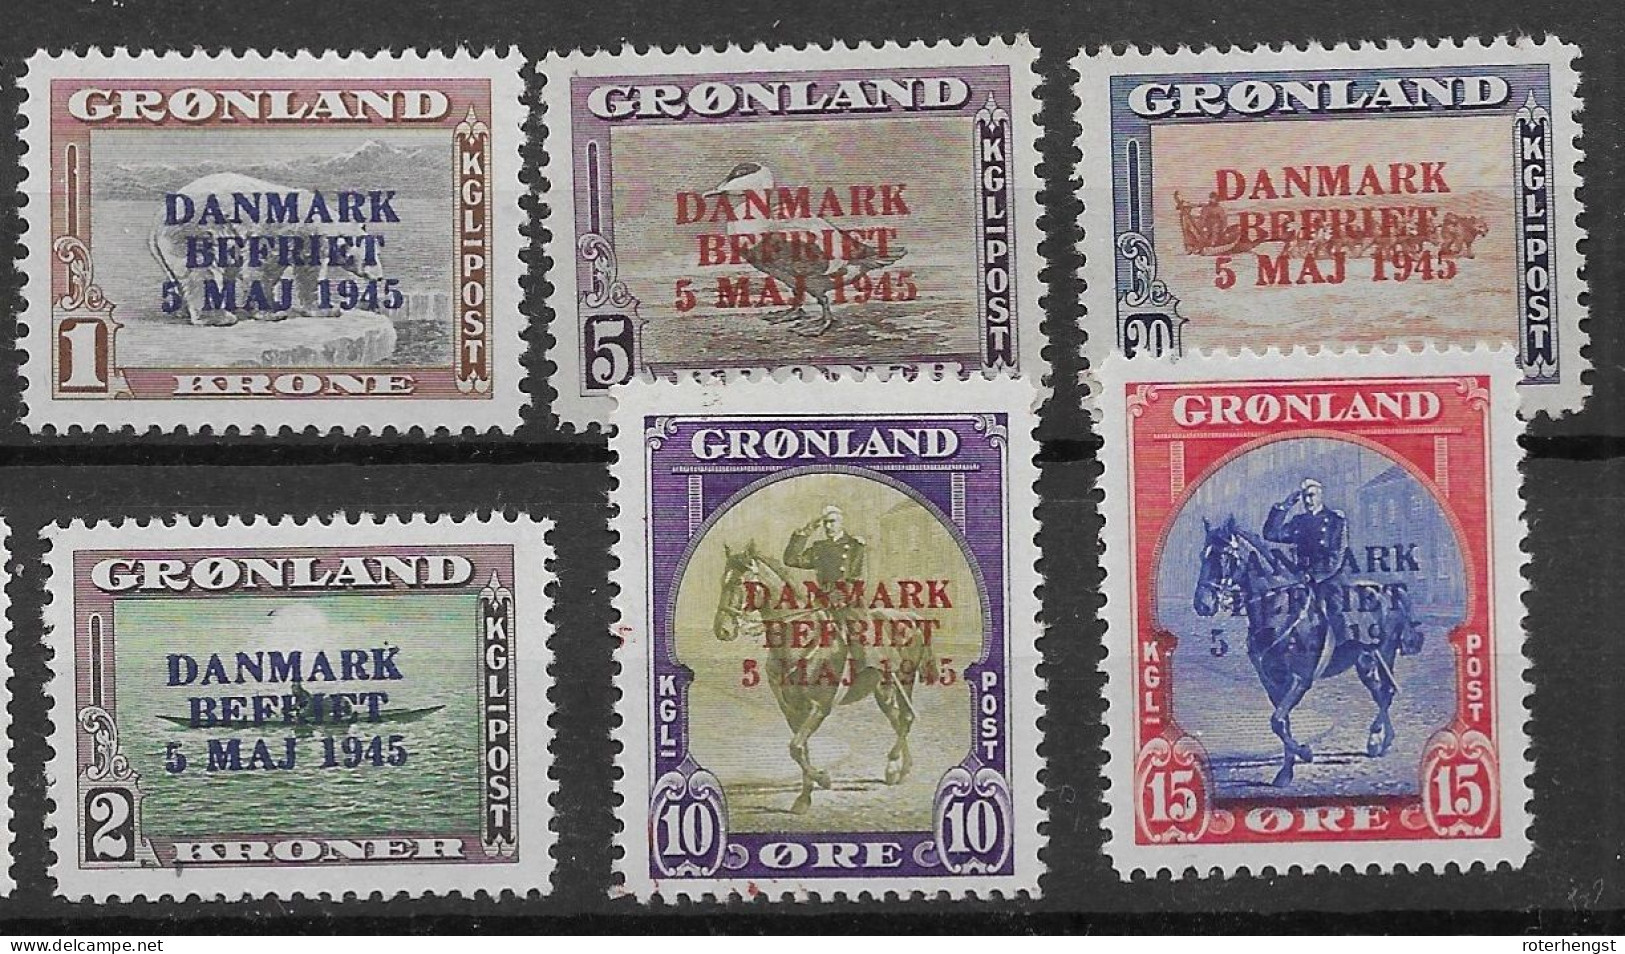 Greenland RARE Complete Set With Error Colour Overprints 1945 (1800 Euros) Mlh * Mint Extremely Low Hinge Trace - Nuevos